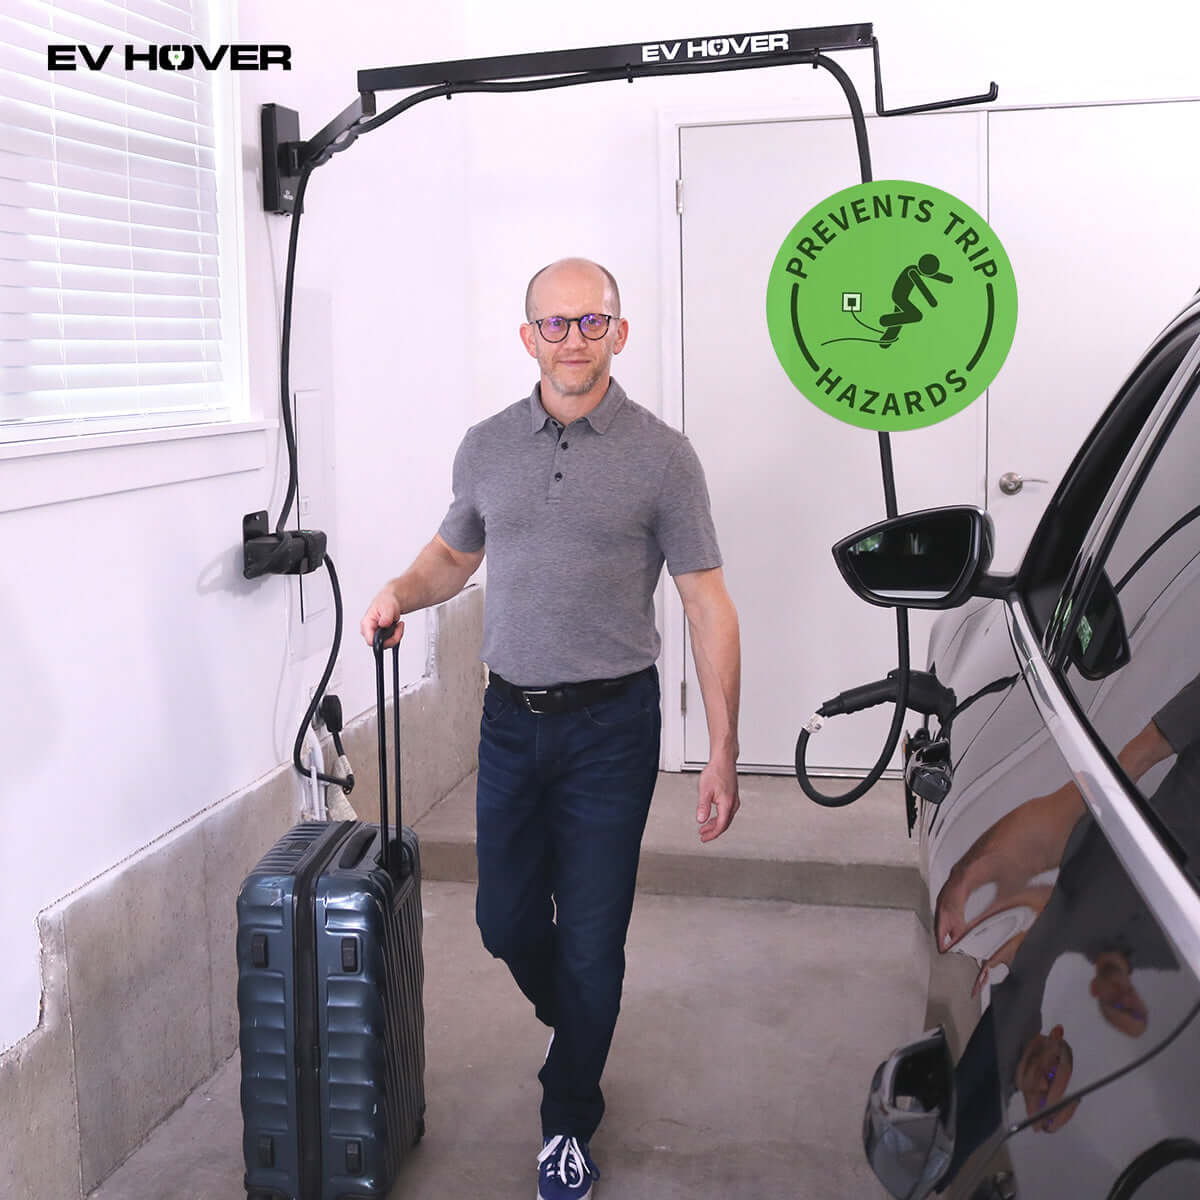 EV Hover - Adjustable Arm for your Electric Vehicle Charging Cable